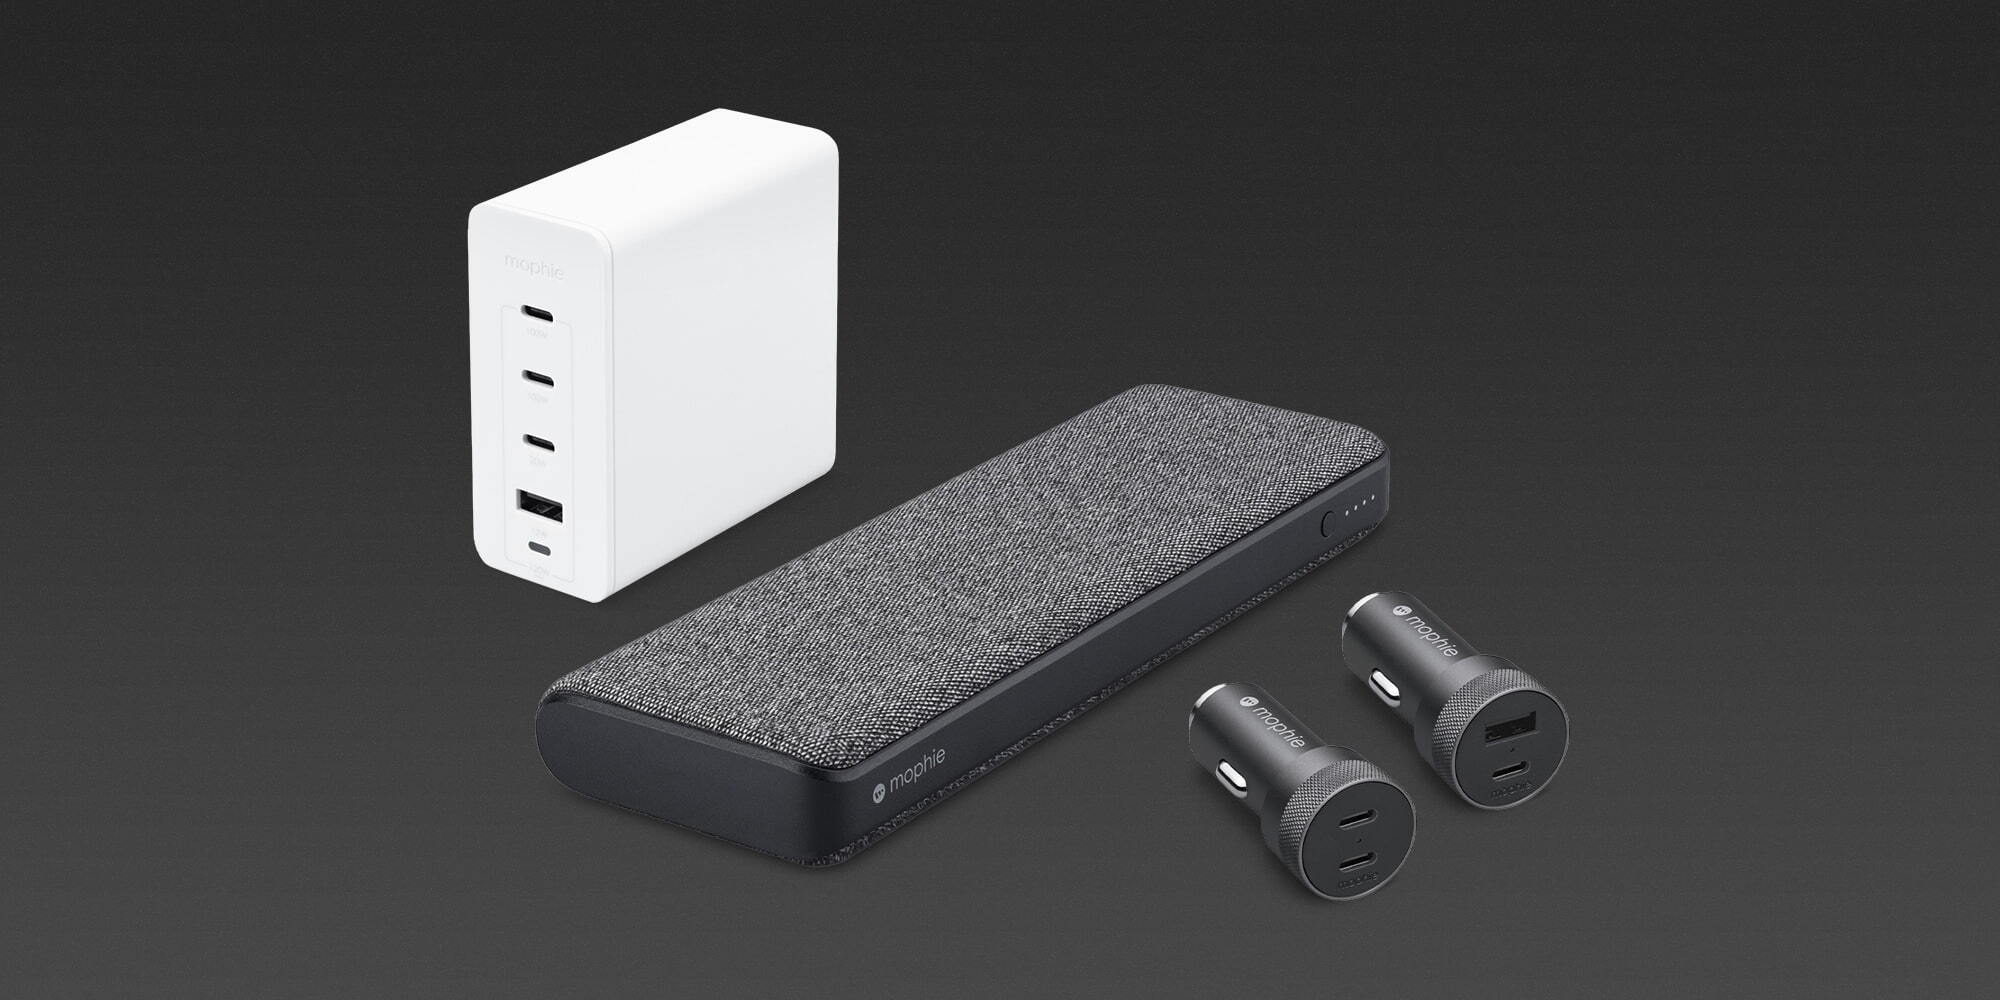 mophie powerstation pro and 4-port GaN charger now available - 9to5Mac